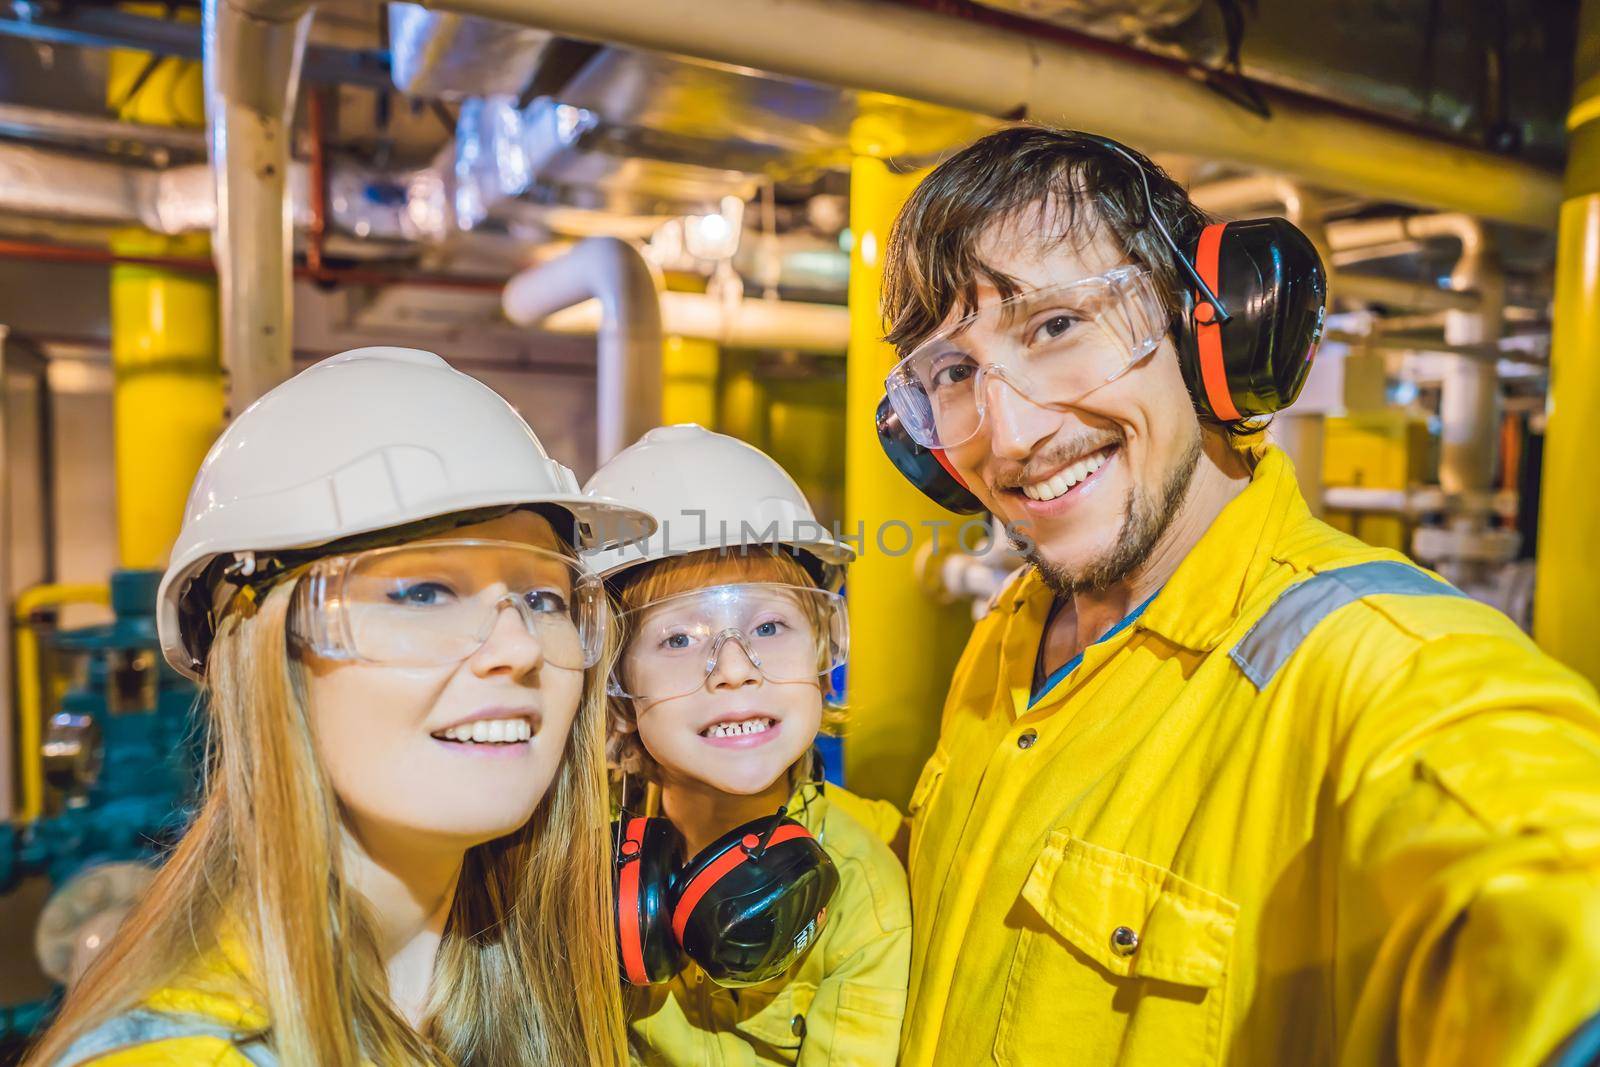 Mom, Dad and Son in a yellow work uniform, glasses, and helmet in an industrial environment, oil Platform or liquefied gas plant by galitskaya